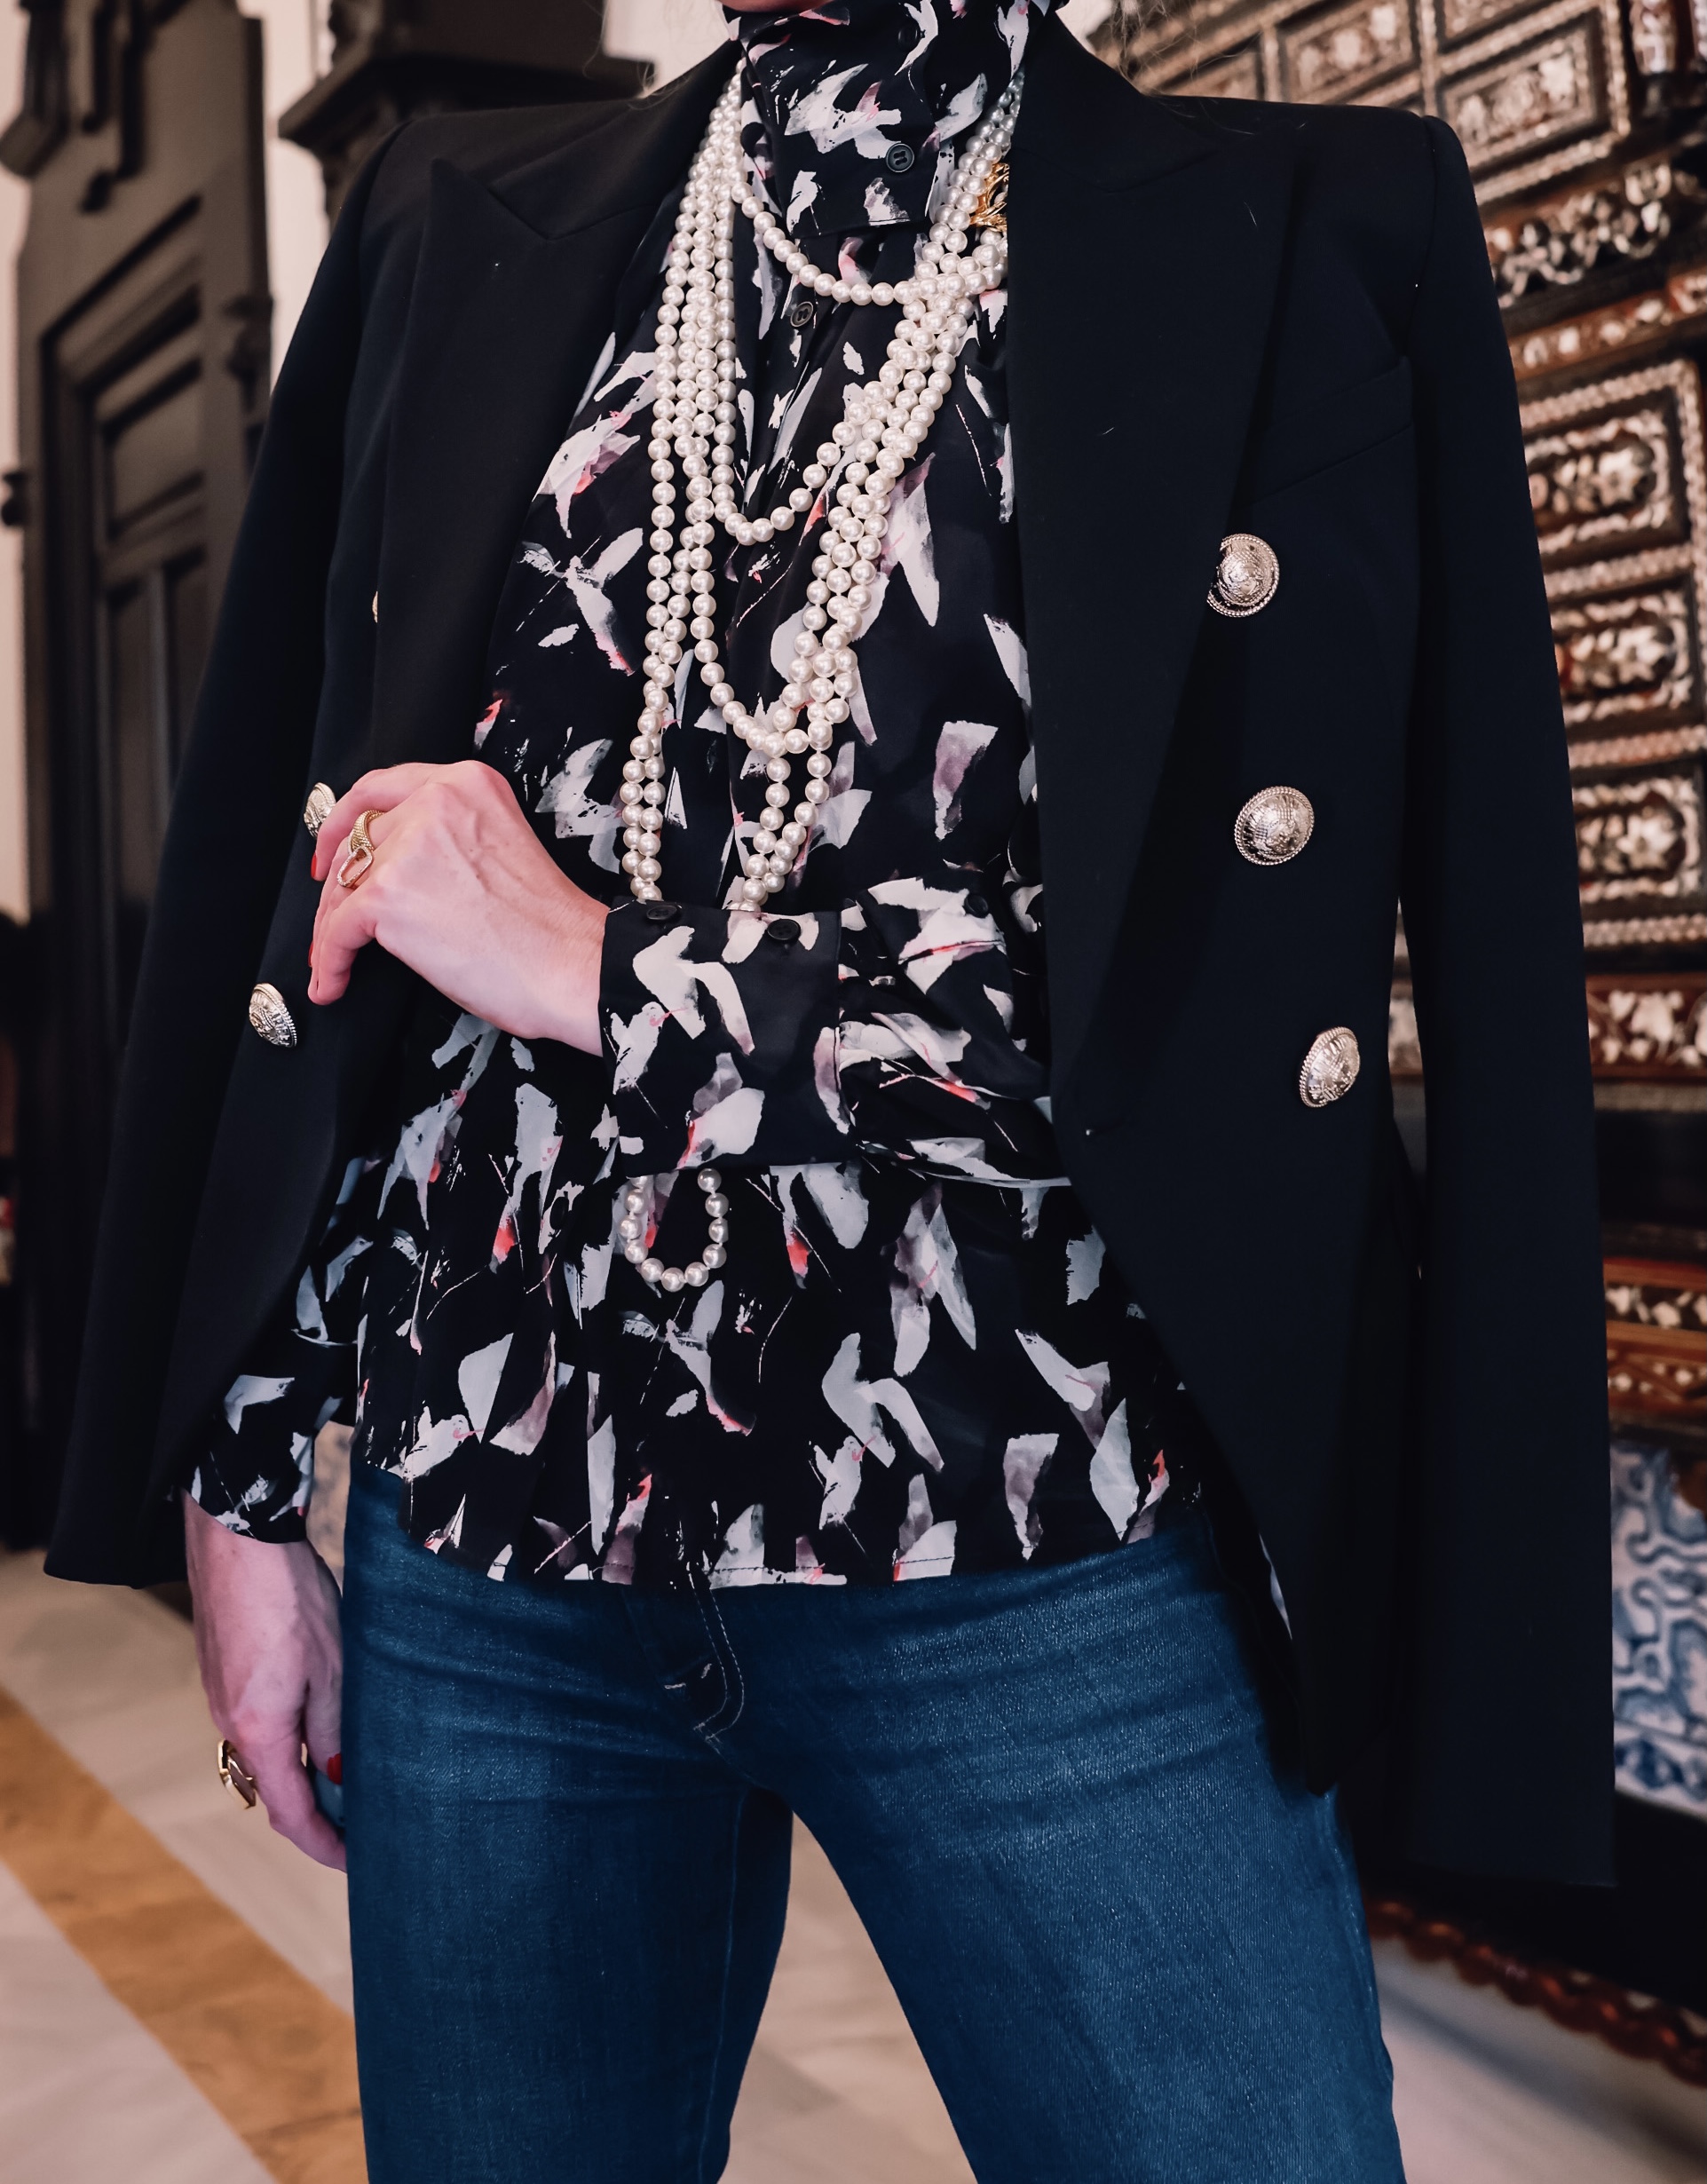 office outfits, stylish office outfits, chic office outfits, office outfits over 40, workwear over 40, stylish workwear, erin busbee, mother frayed hem flare jeans, balmain blazer, chanel multi strand necklace, iro printed blouse, black pointed toe pumps, sevilla, spain